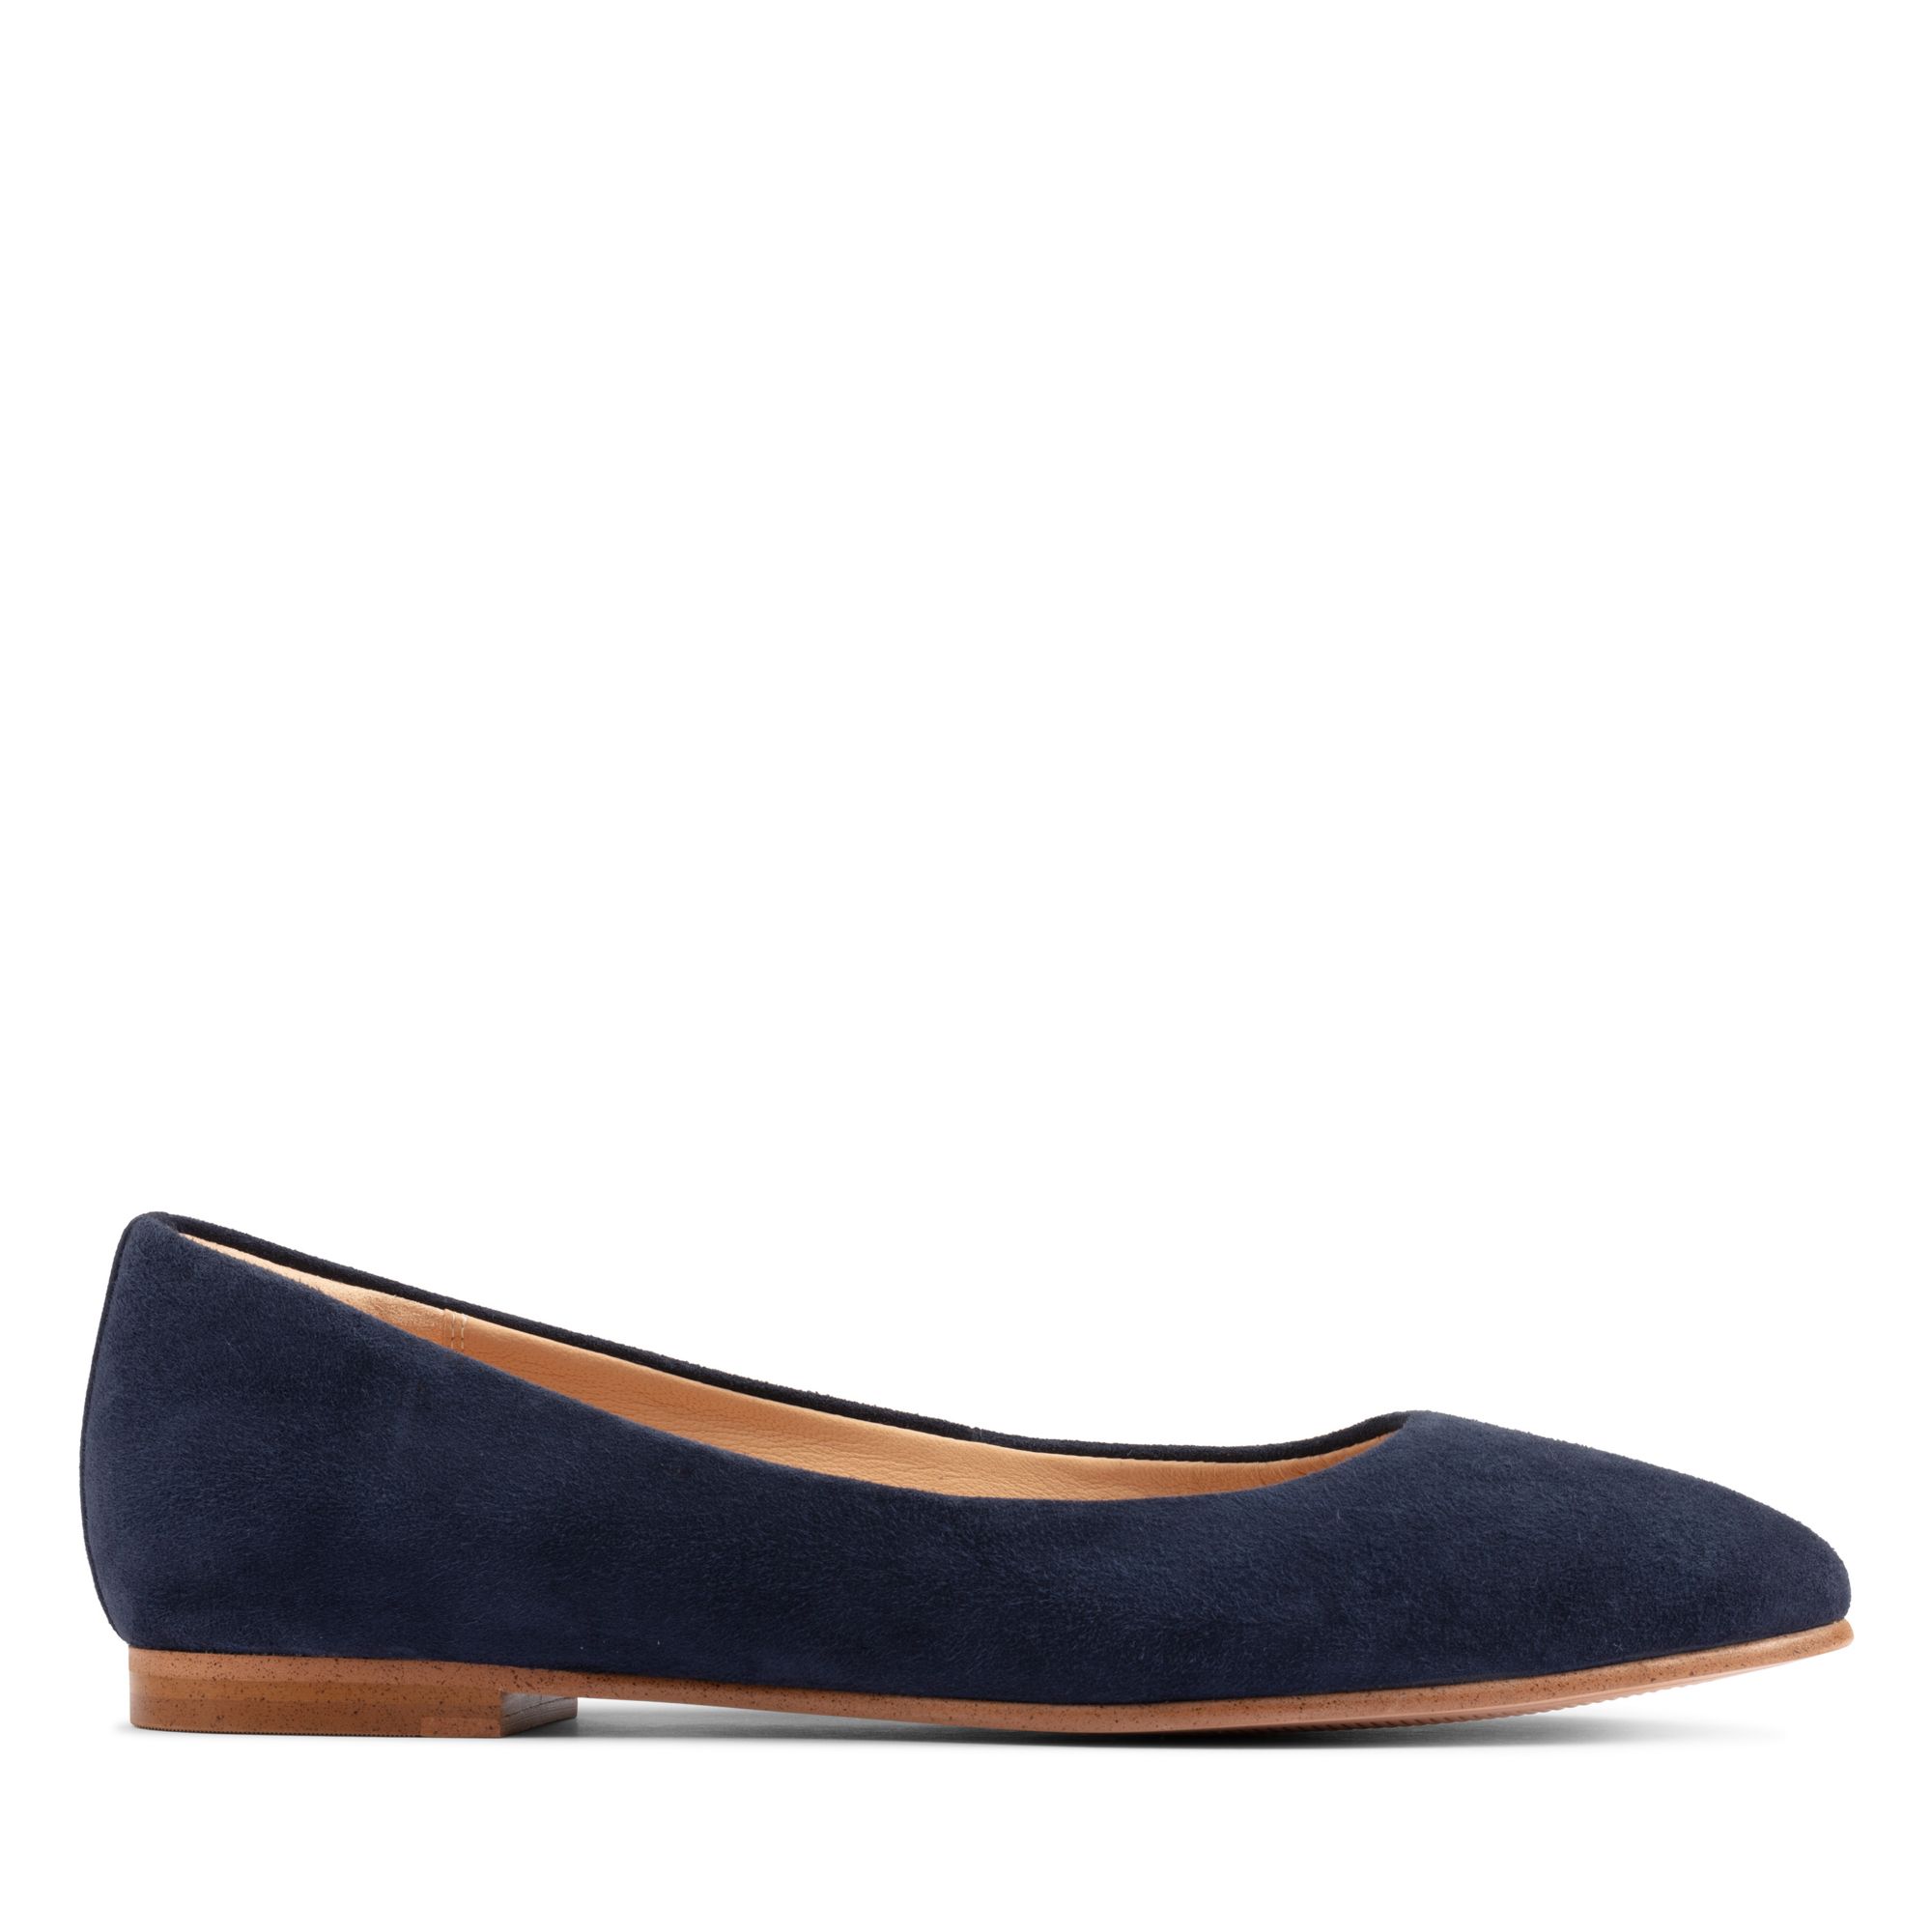 Clarks + Grace Piper Navy Suede